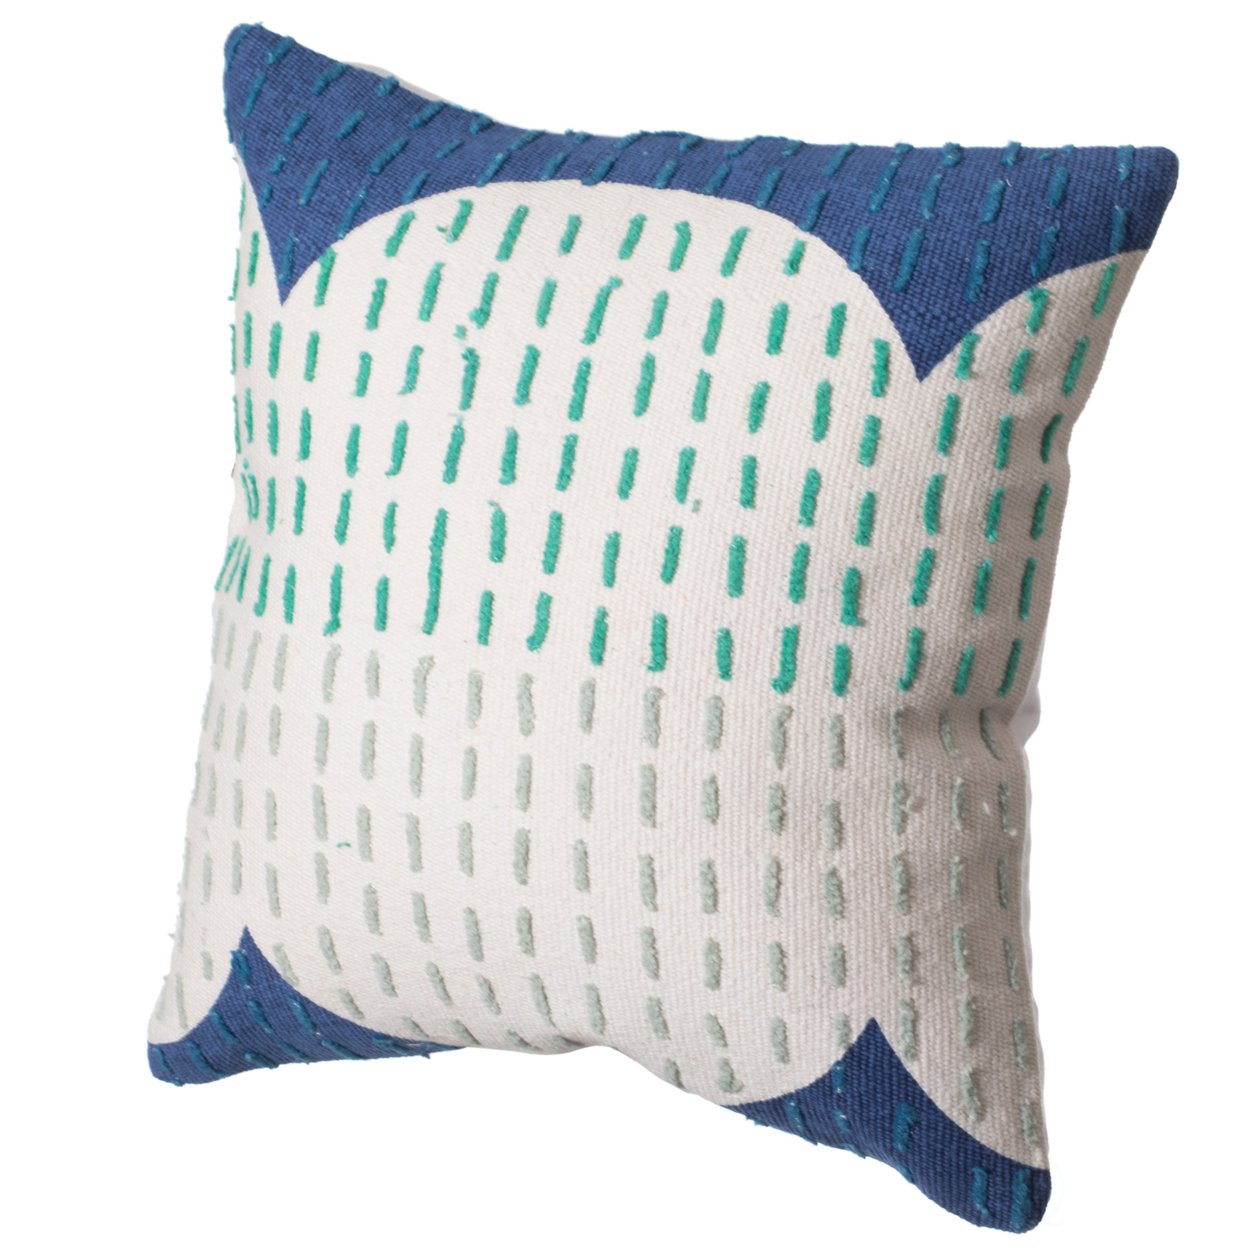 16" Handwoven Cotton Throw Pillow Cover with Ribbed Line Dots and Wave Border - blue with cushion